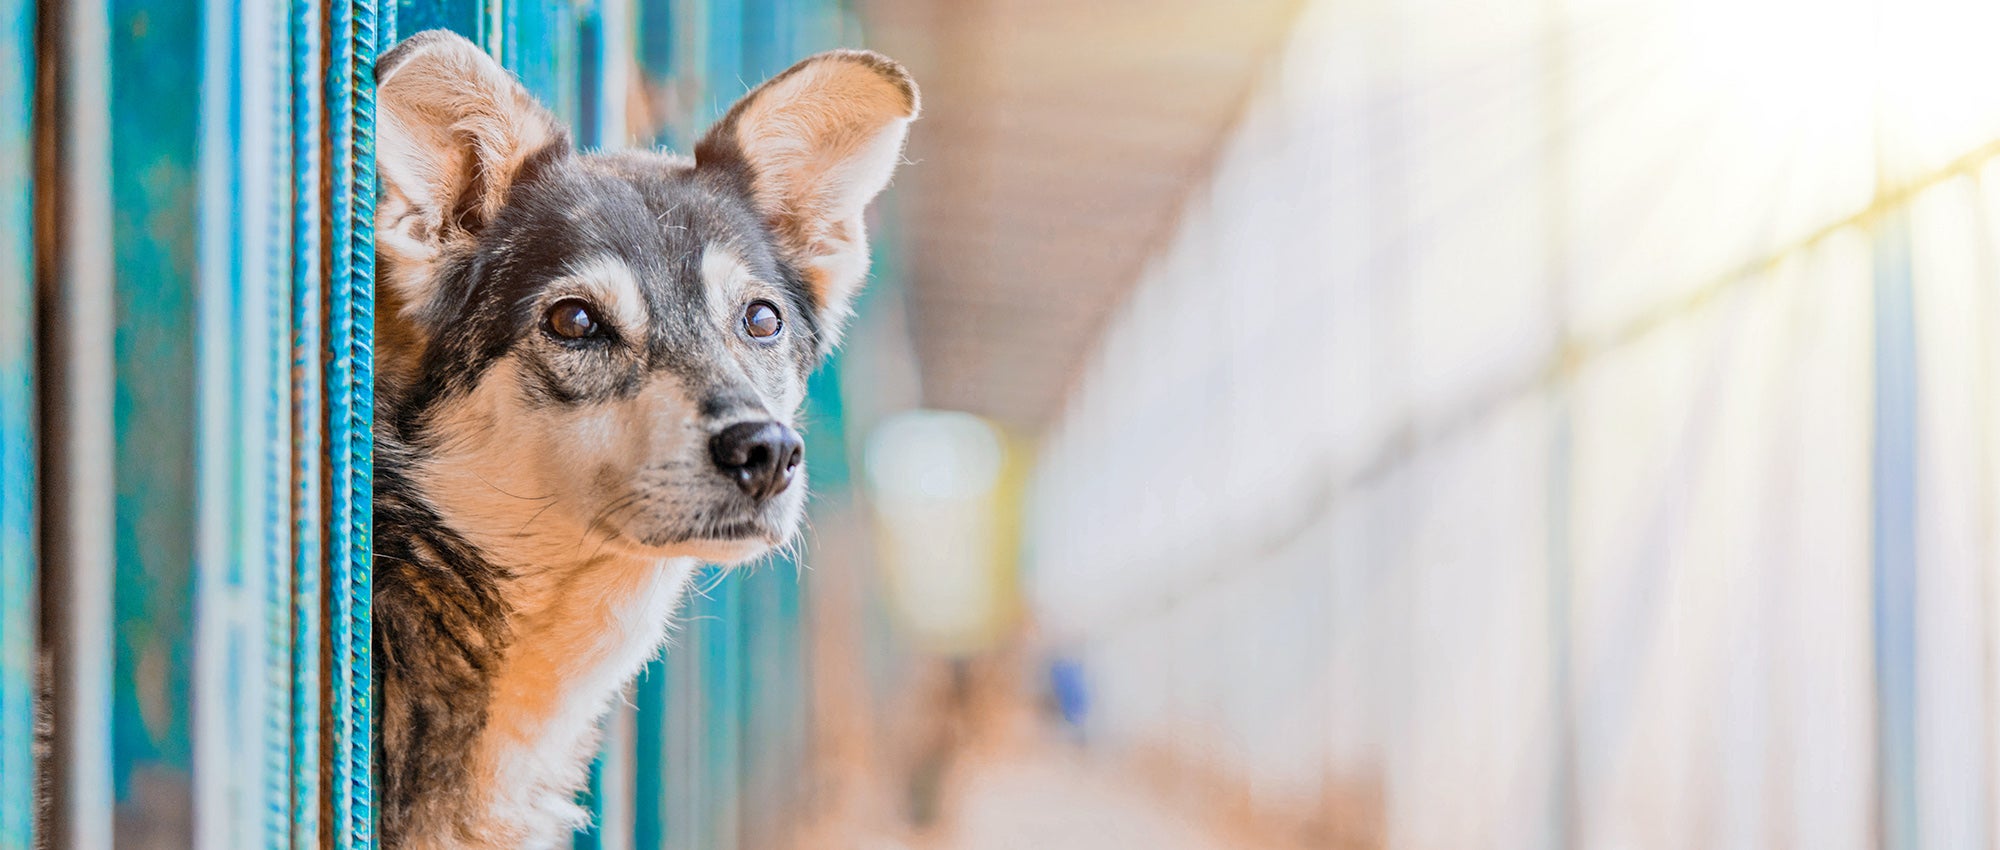 How to help animals in shelters | Humane Society of the United States